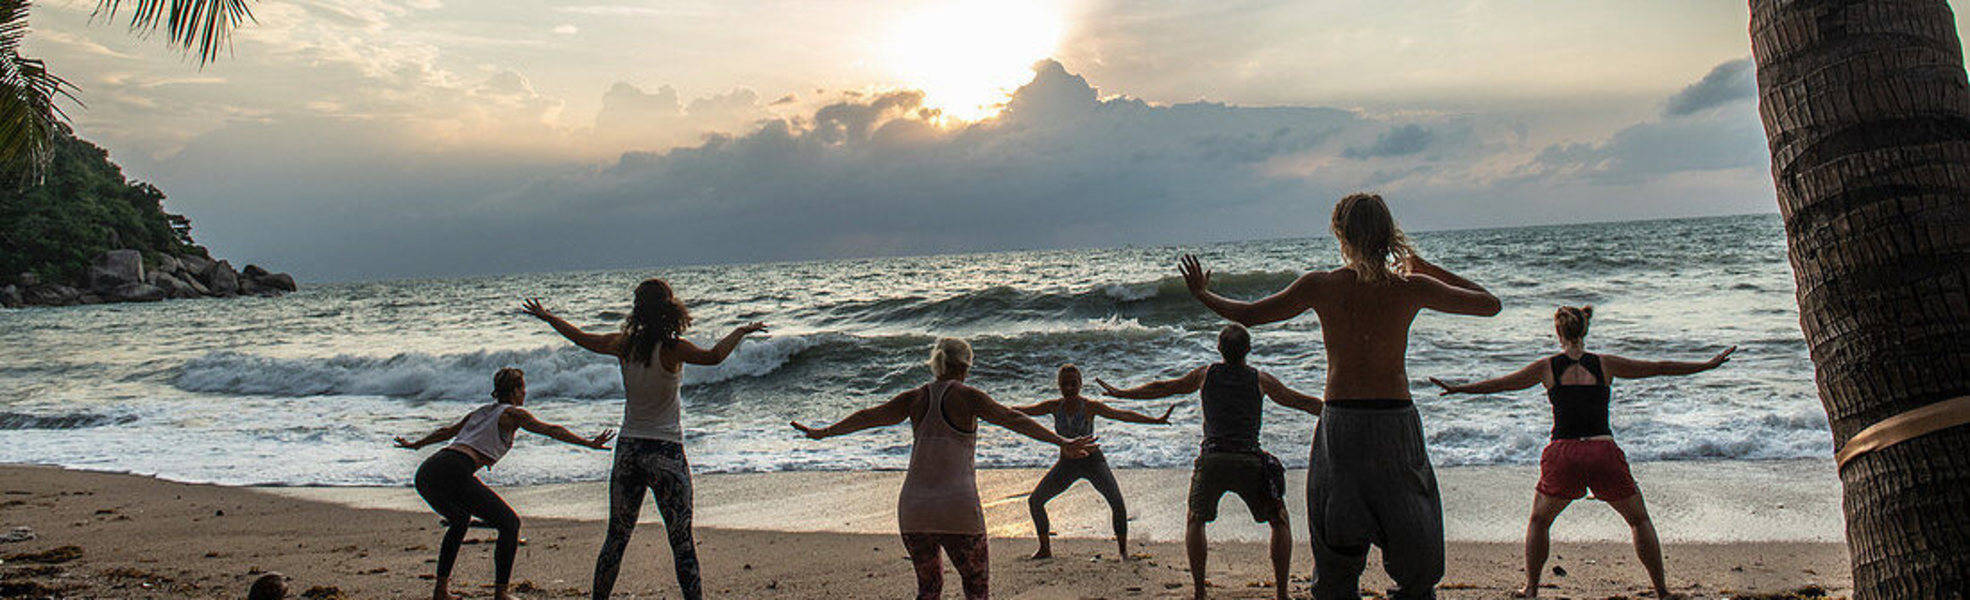 Yoga on the beach in Thailand - at Adventure & Trips